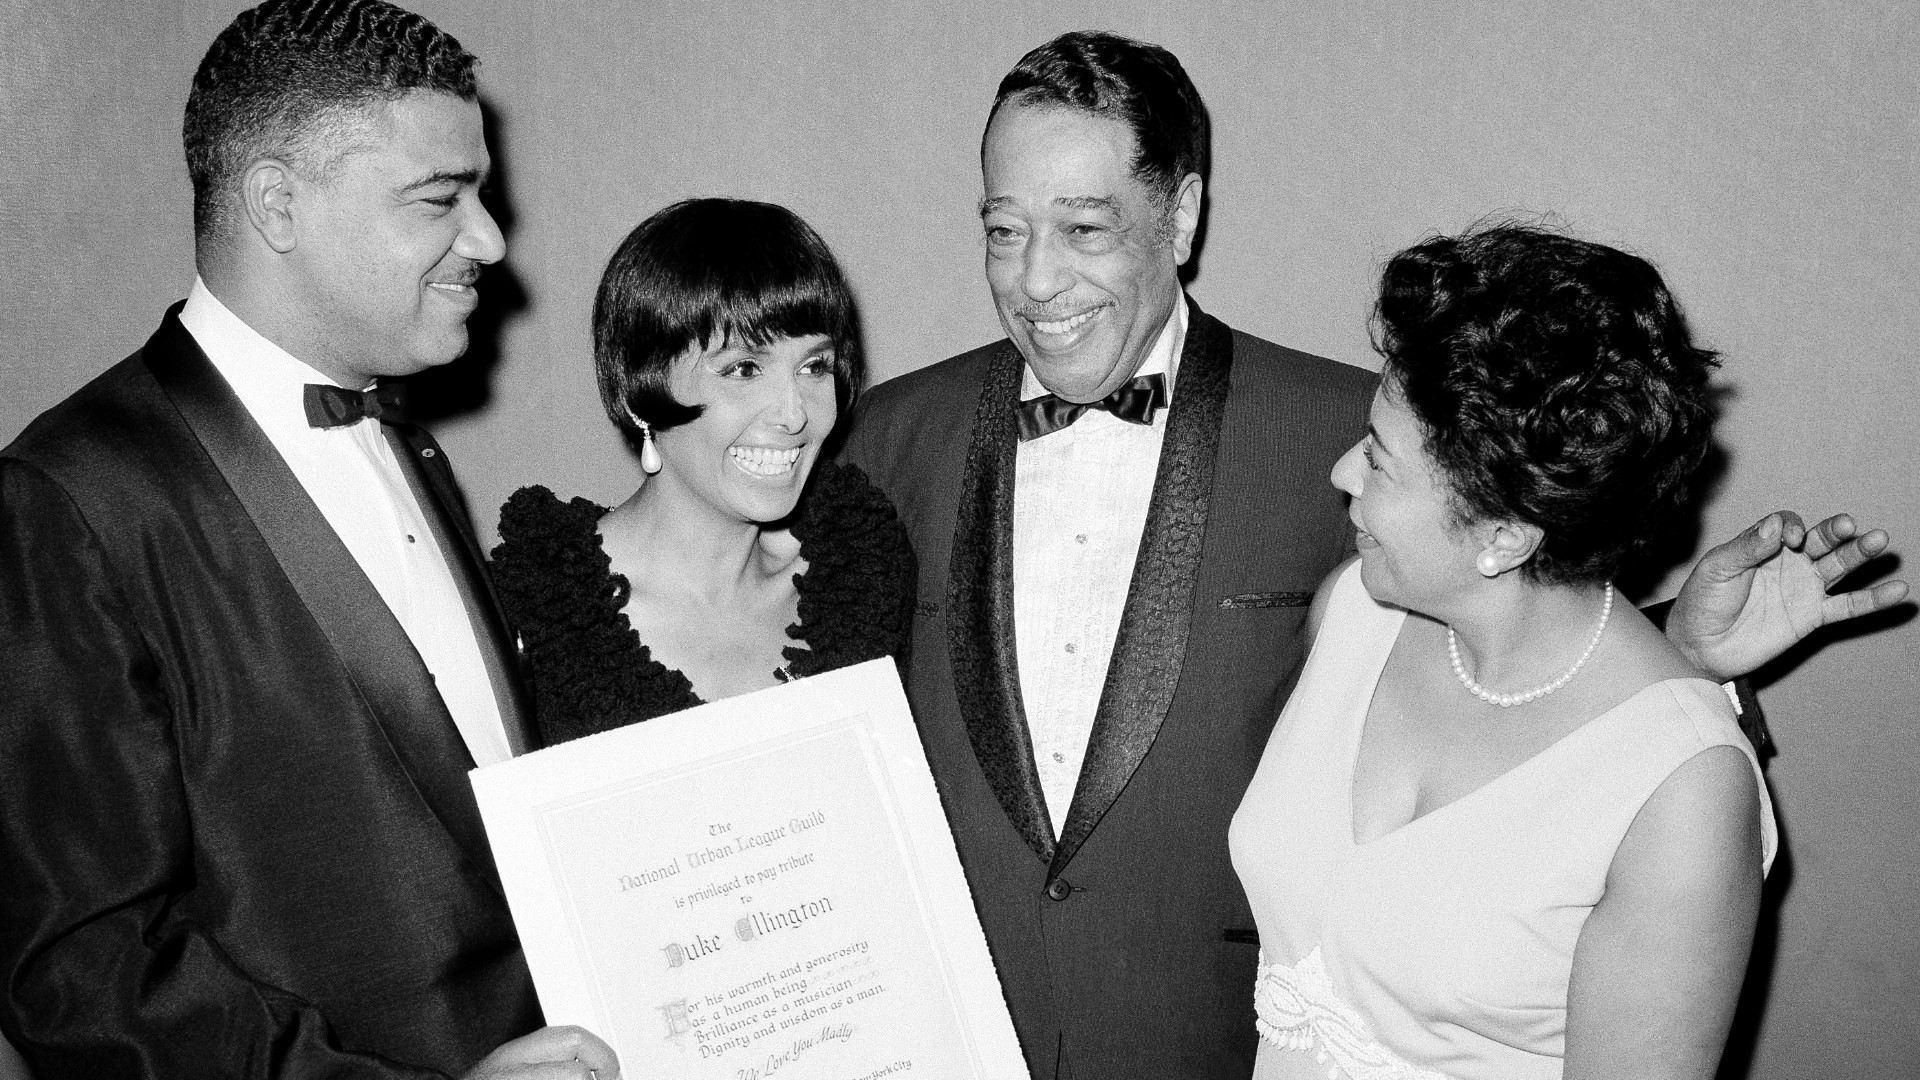 He's served for presidents and even held the top post at the National Urban League. Young also had a role in the famous March on Washington more than 50 years ago.